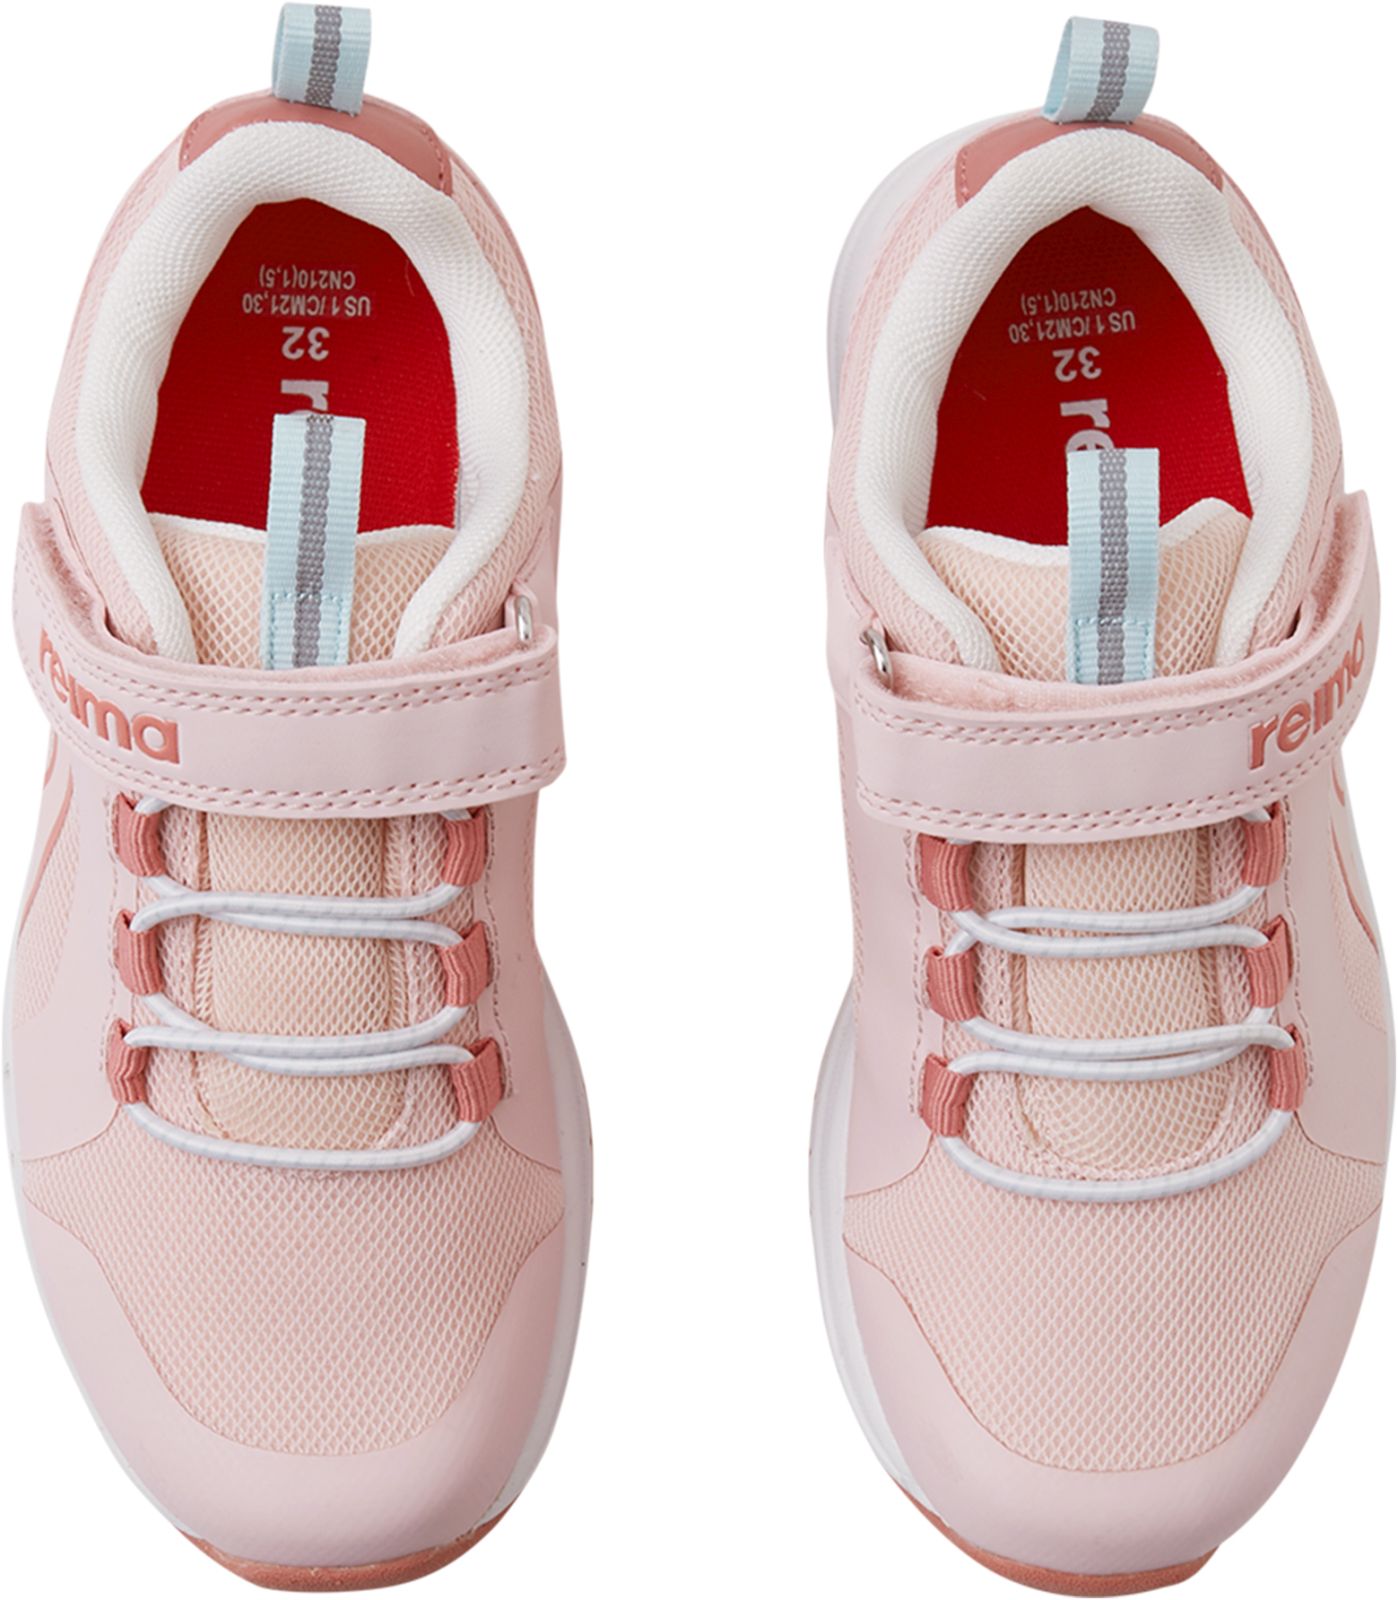 Children's sneakers with a membrane